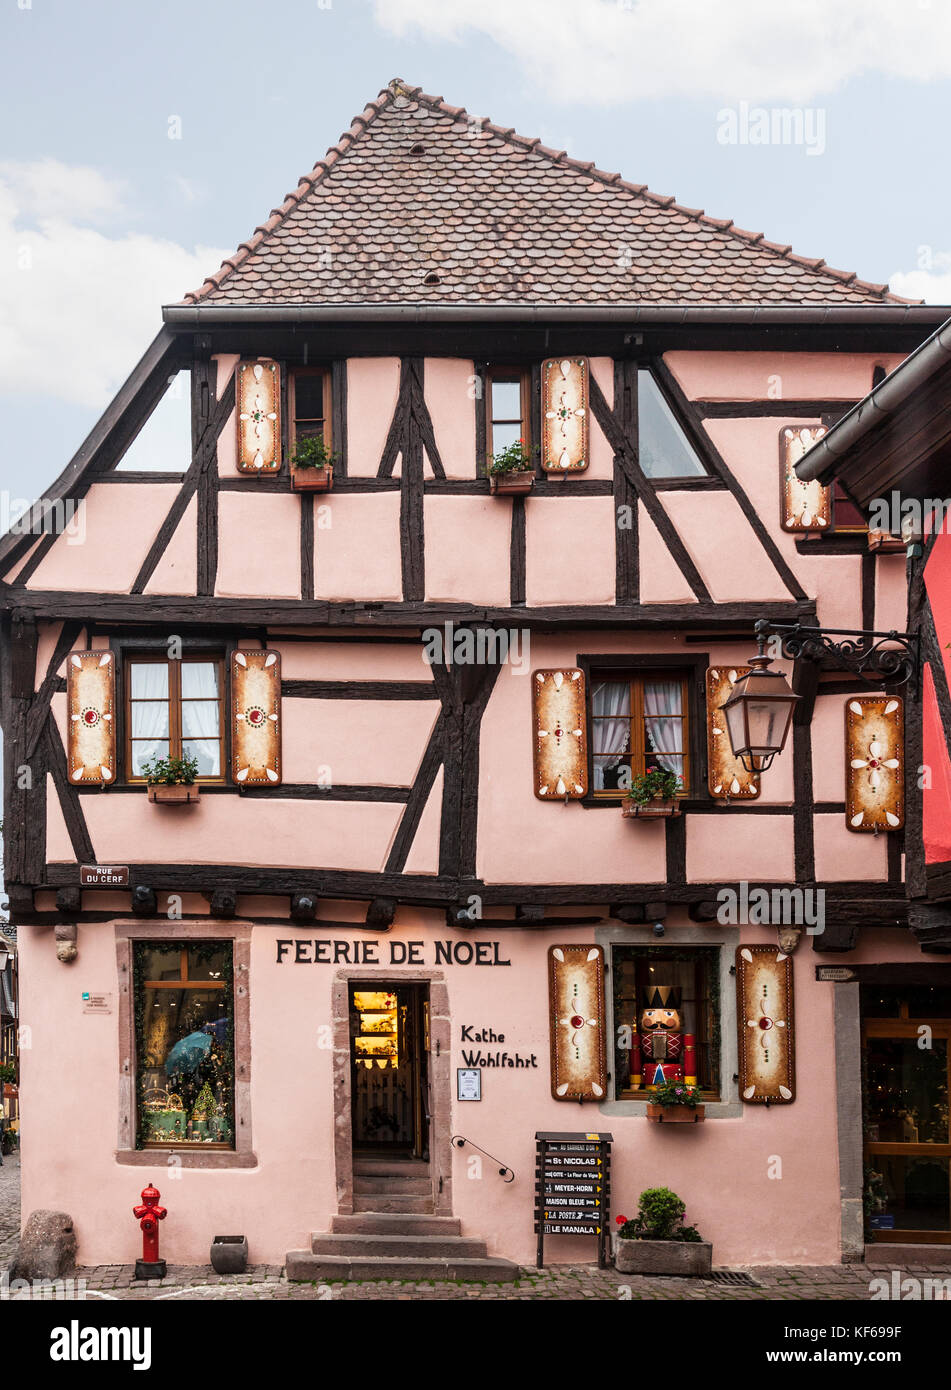 Feerie de Noel, a specialist Christmas shop in a painted, half-timbered medieval building in the village of Riquewihr in Alsace, France. Stock Photo